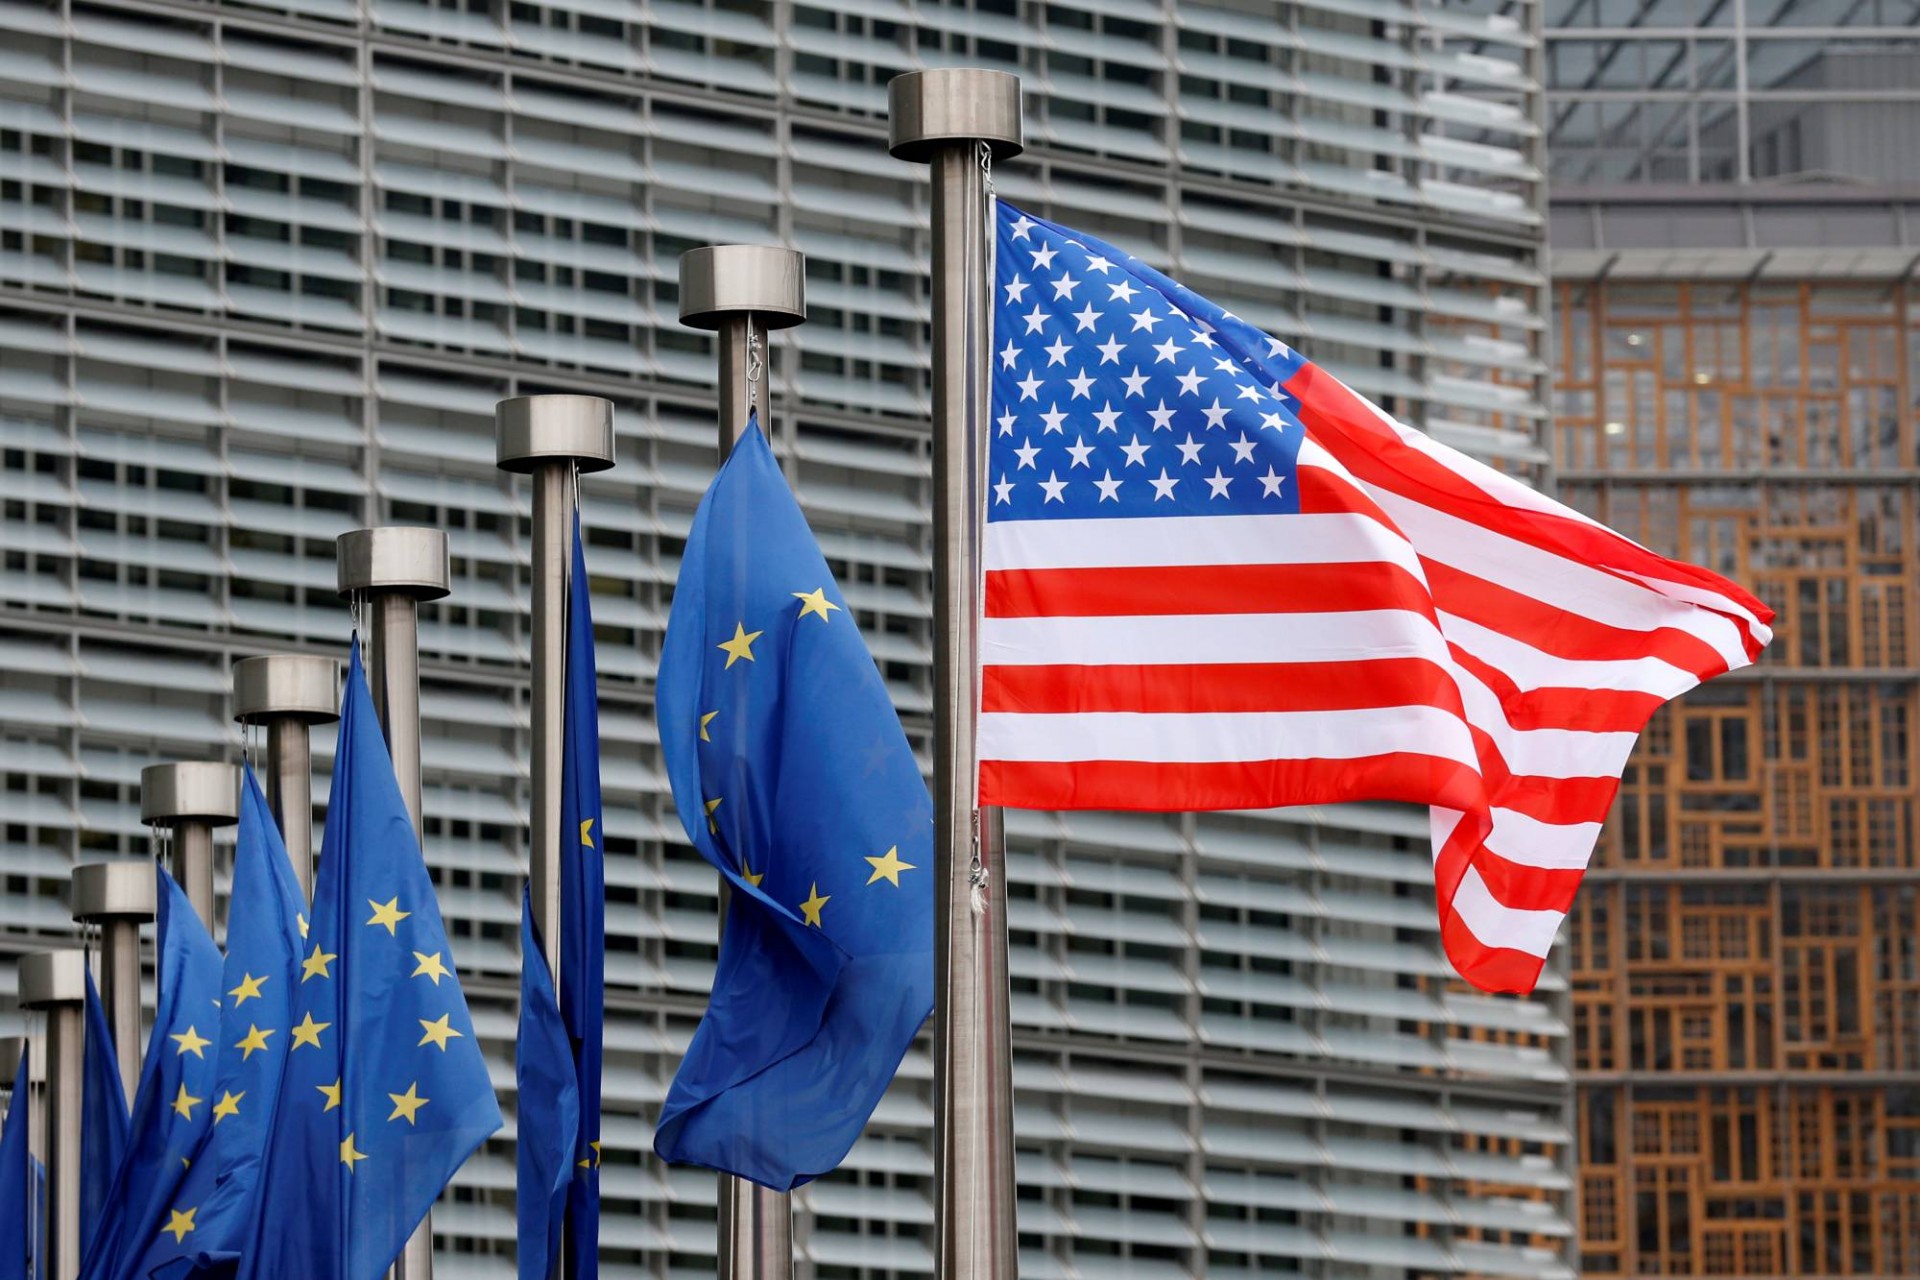 Digital Services Act: What can the US learn from the EU?